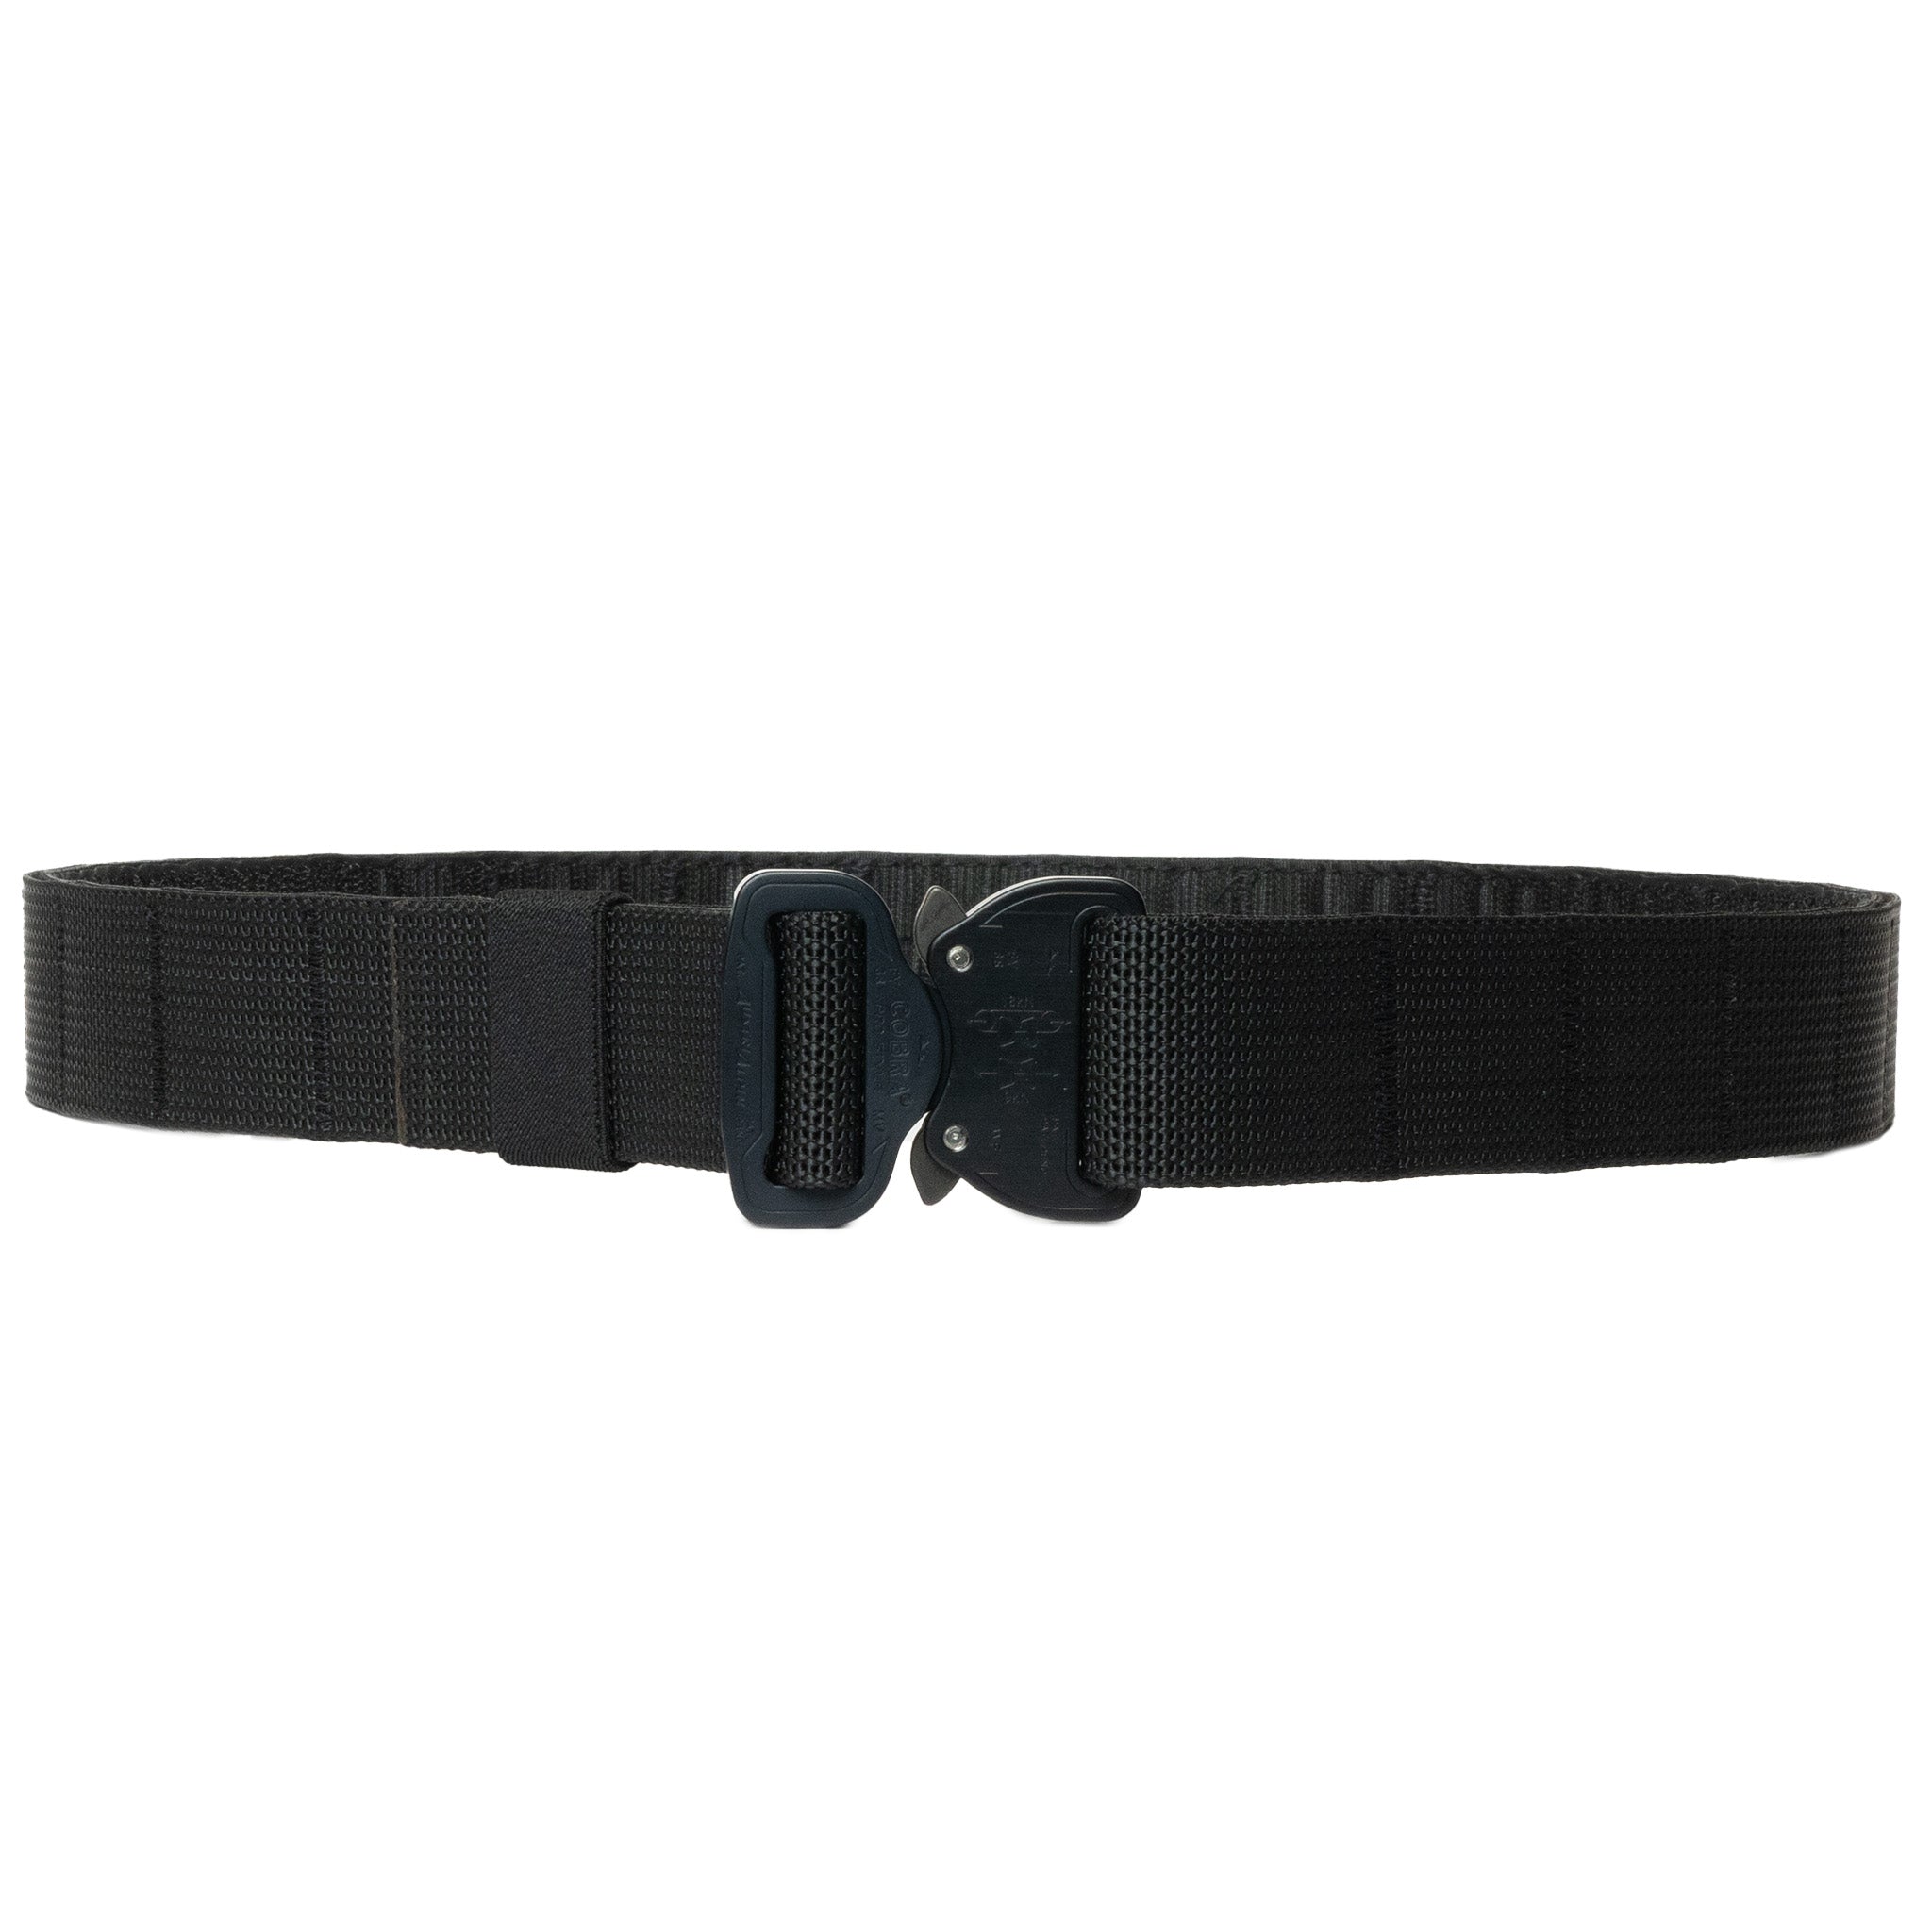 Ciguera Gear Company Battlewagon War Belt in Black that is the ideal choice as a duty belt. It's made in the USA and the buckle is a Austri Alpin Cobra buckle.